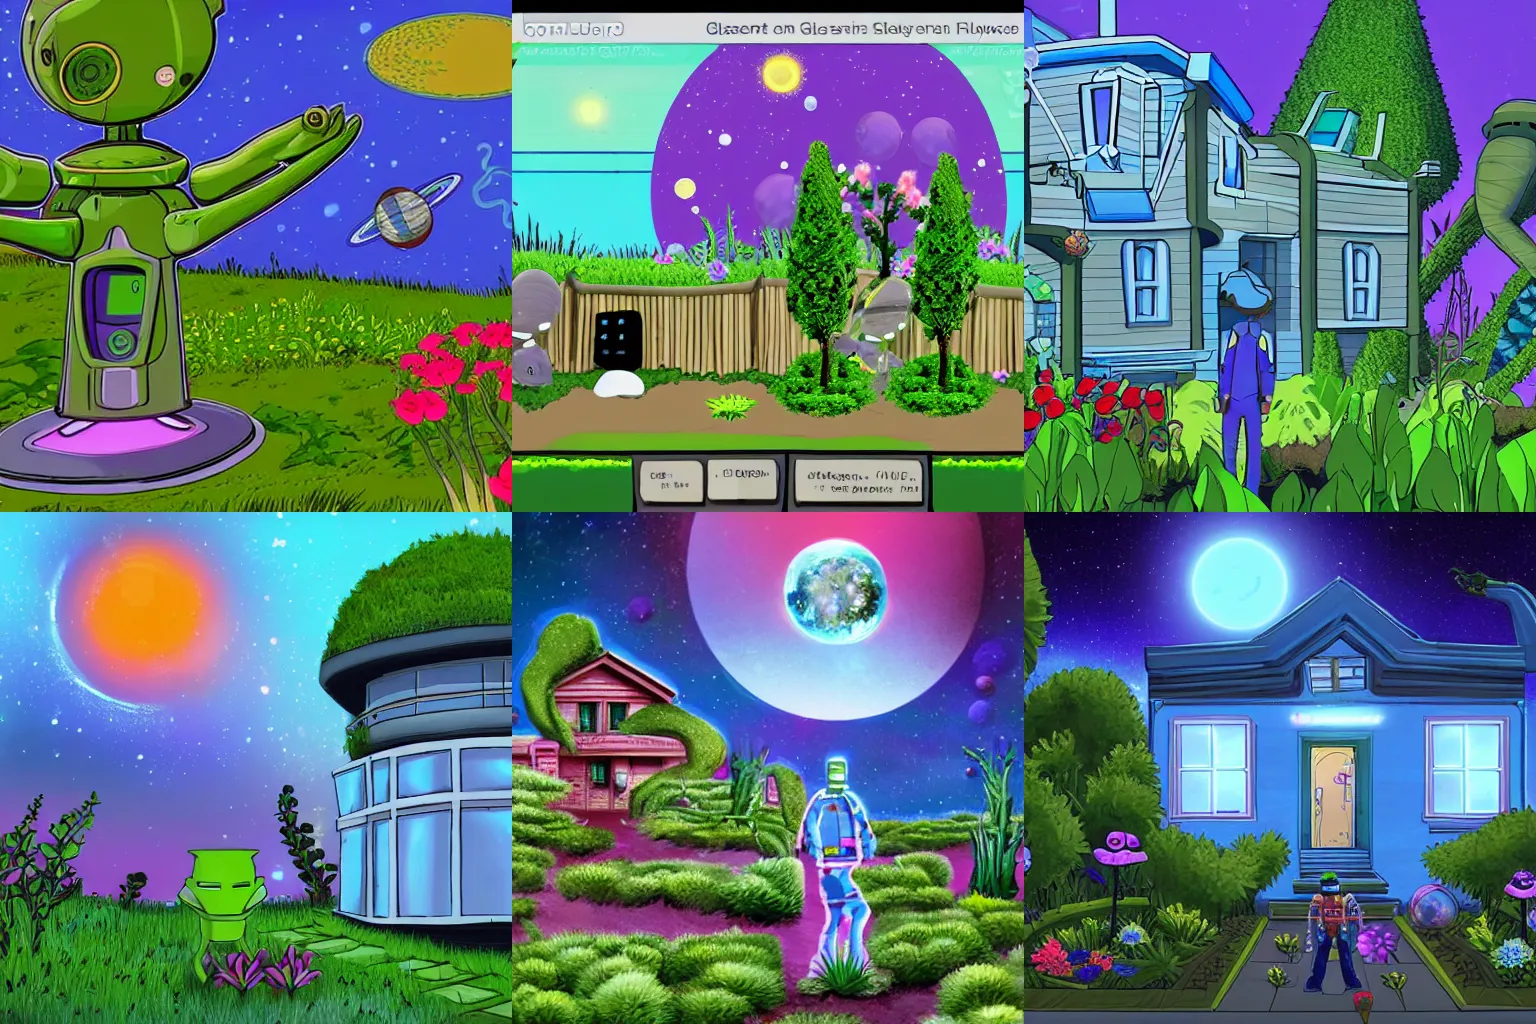 Prompt: in front of a strange looking house, in a small town on an alien planet, alien plants and flowers in a garden in front of the house, from a space themed point and click 2D graphic adventure game, made in 2019, high quality graphics